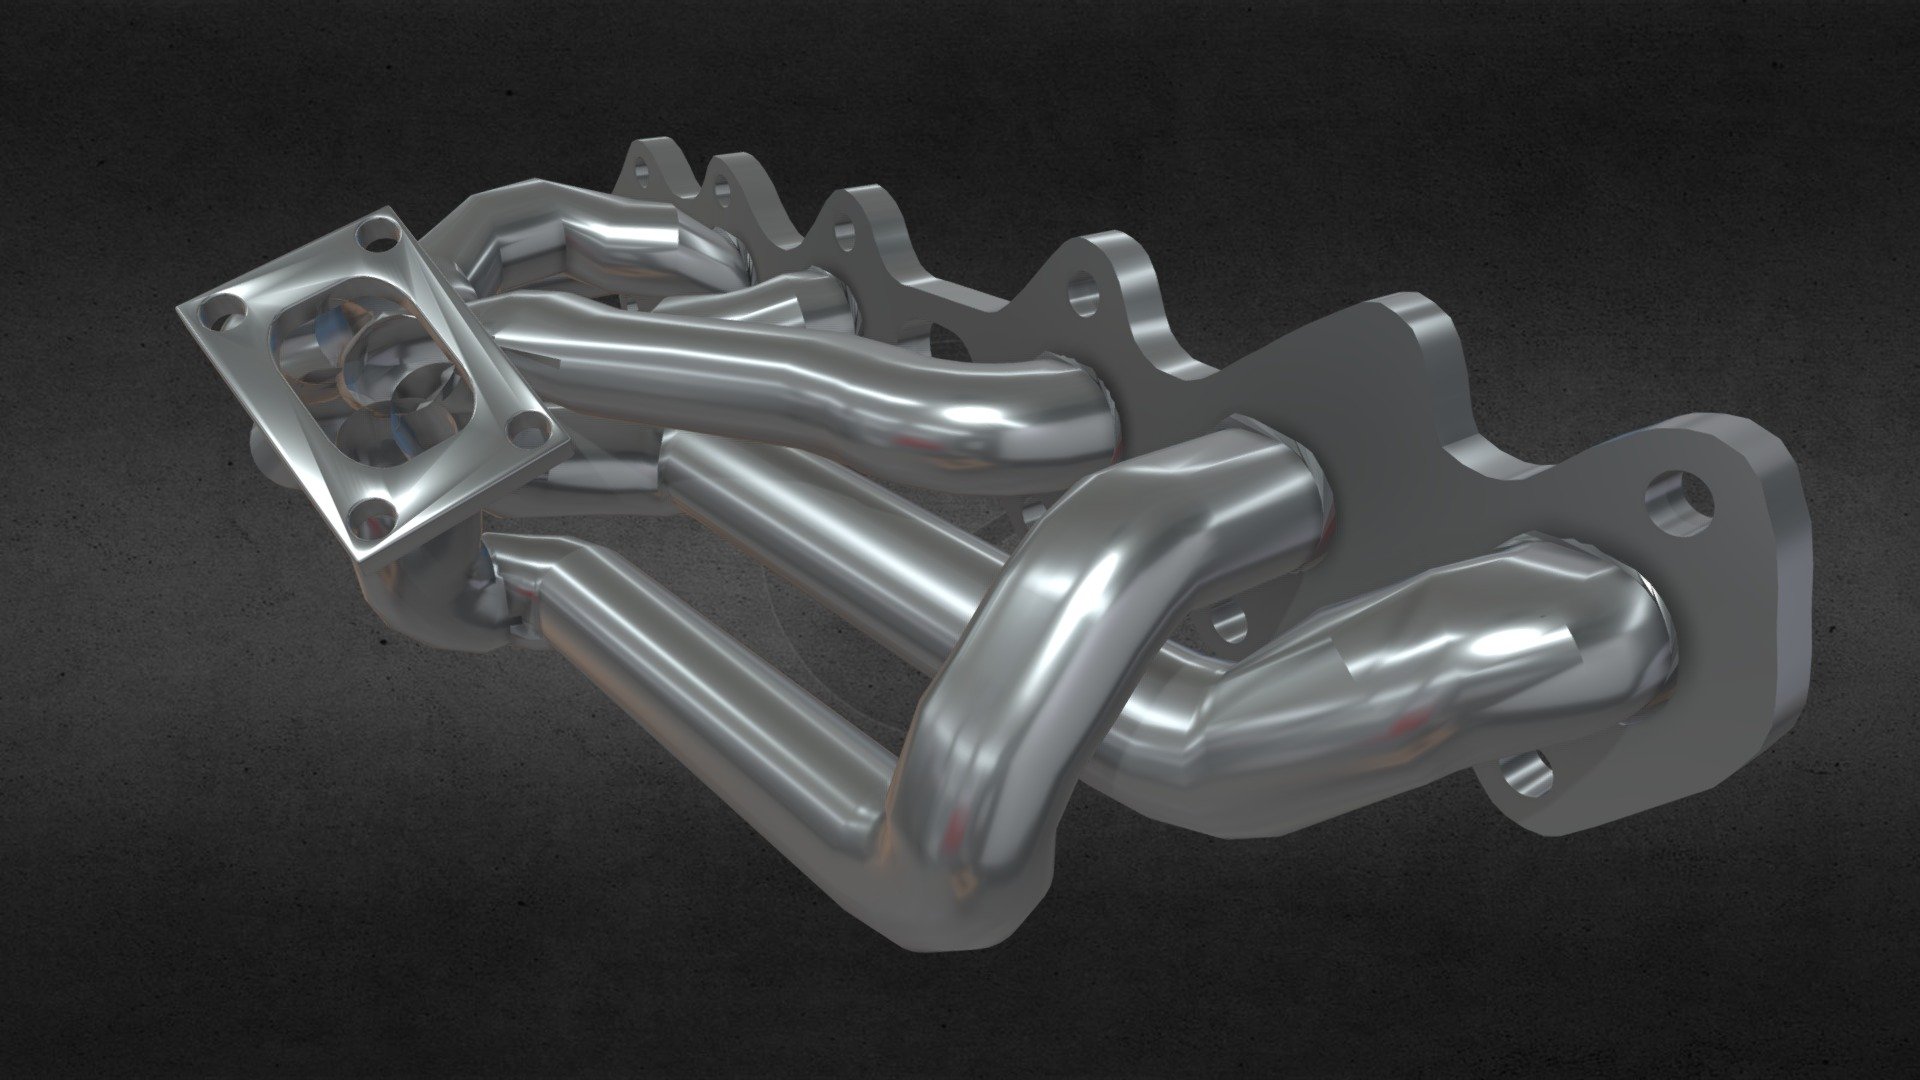 this is the exhaust manifold of a toyota 2jz engine, and is used to connect a medium-large turbo.

the model not faithful to the original measurements of the engine or a turbo - 2jz engine exhaust collector - 3D model by BR1___ 3d model